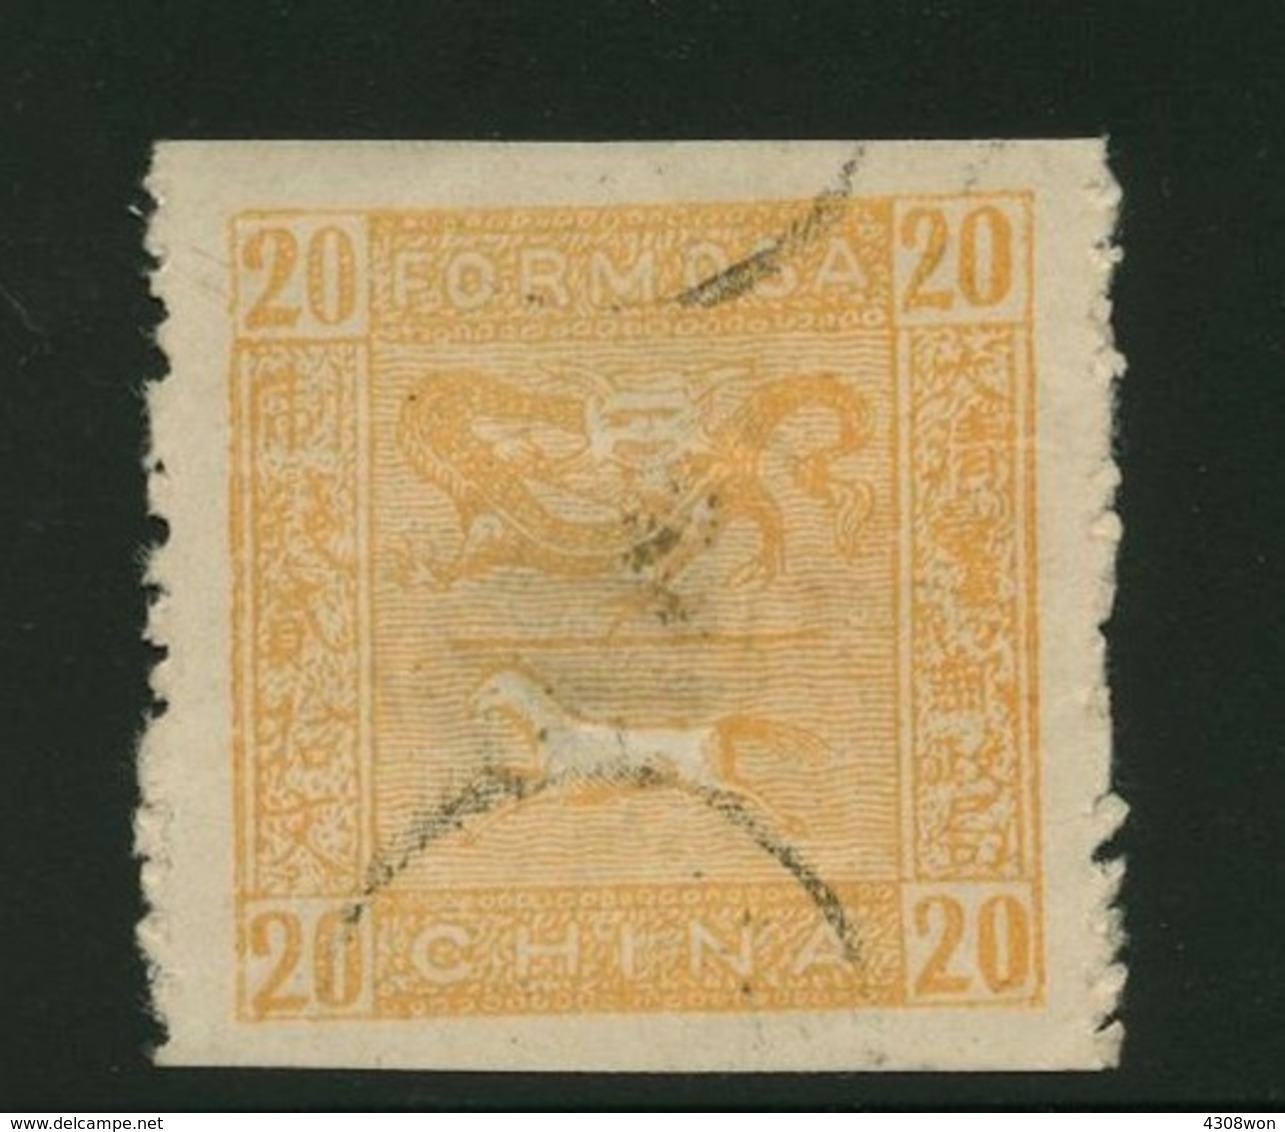 Imperial CHINA / FORMOSA 1888 HORSE AND DRAGON STAMP, SG #C6 Mint Unused - 1888 Chinese Province